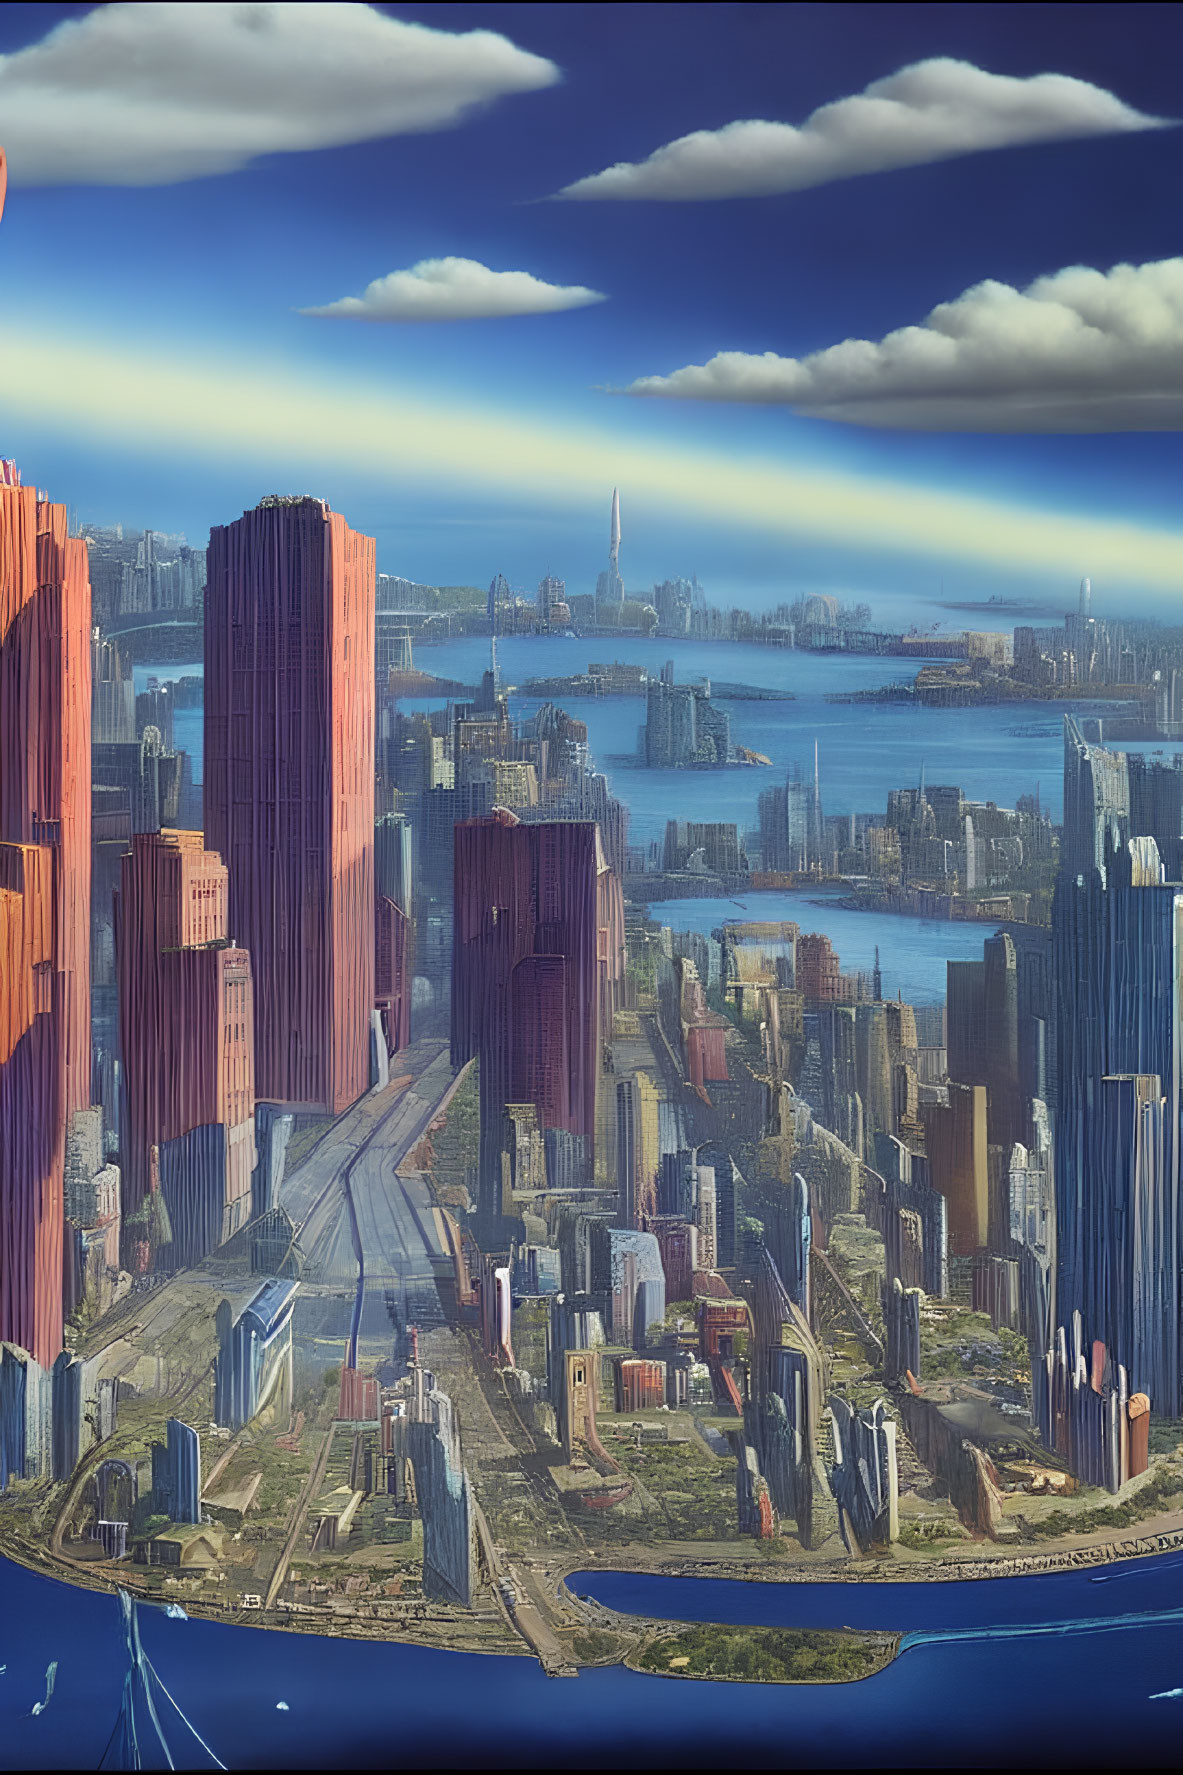 Futuristic cityscape with towering skyscrapers and central avenue under blue sky